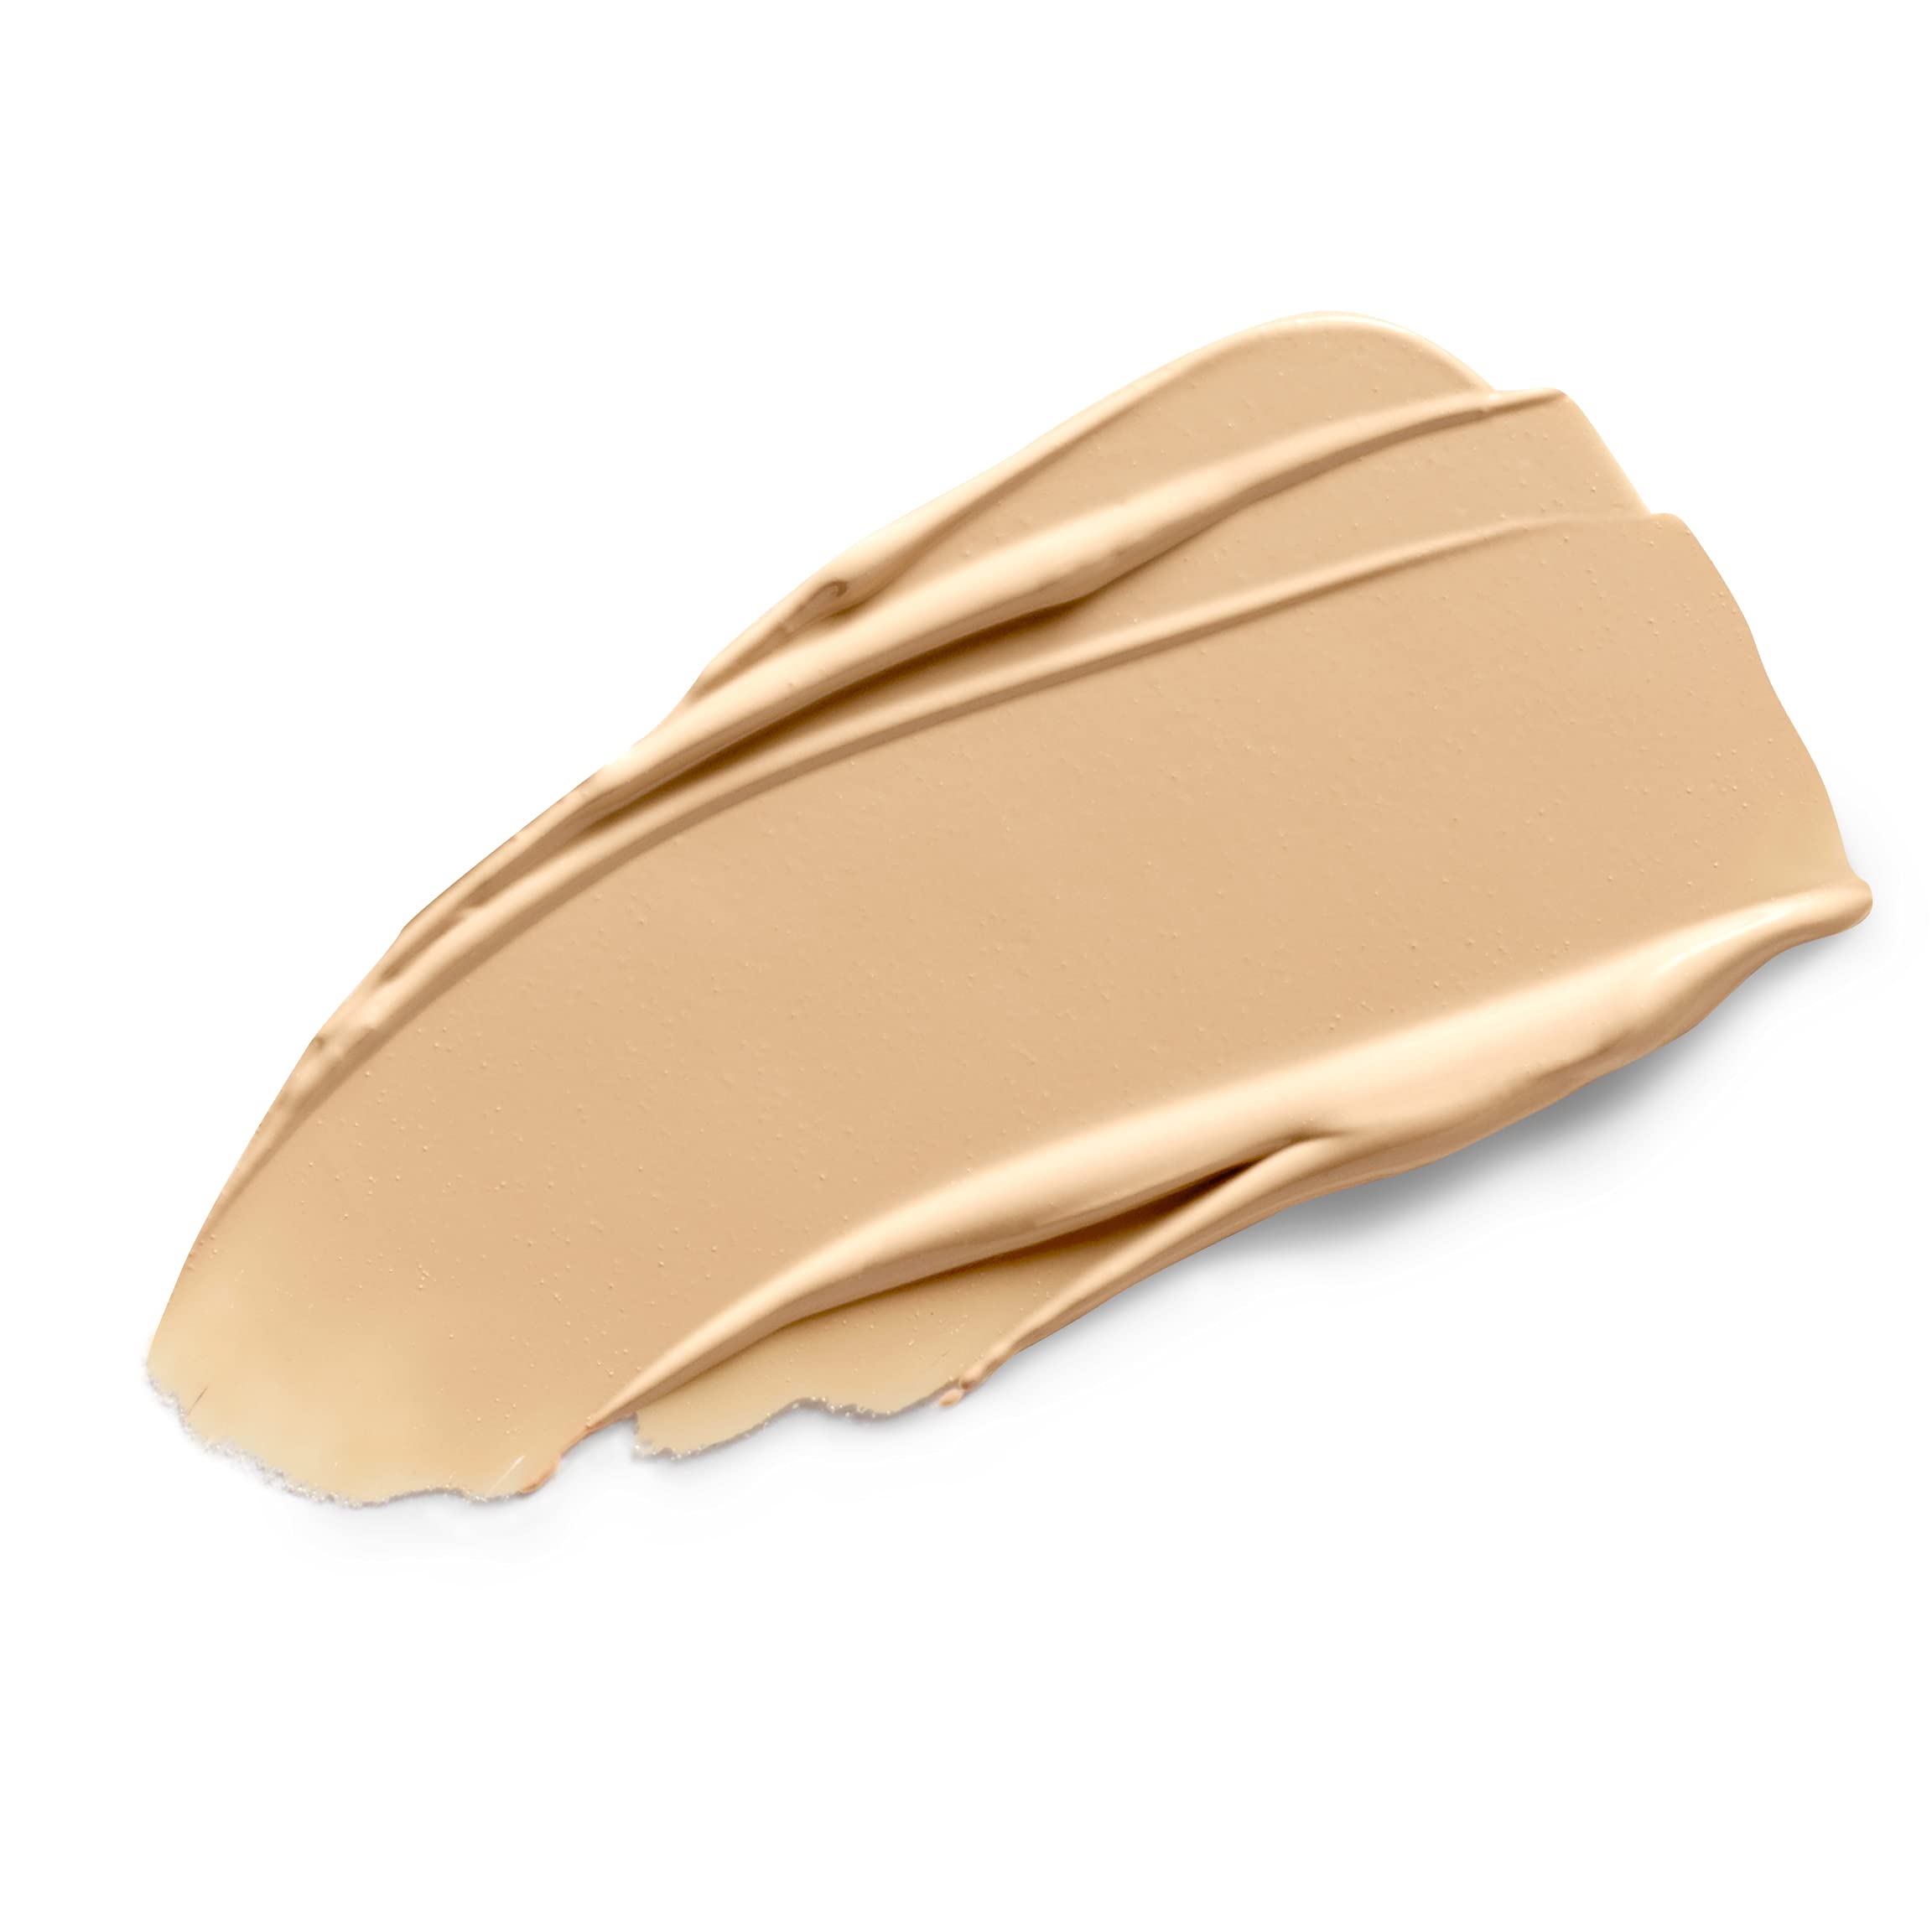 Physicians Formula Butter Believe It! Foundation + Concealer 1- Fair | Dermatologist Tested, Clinicially Tested